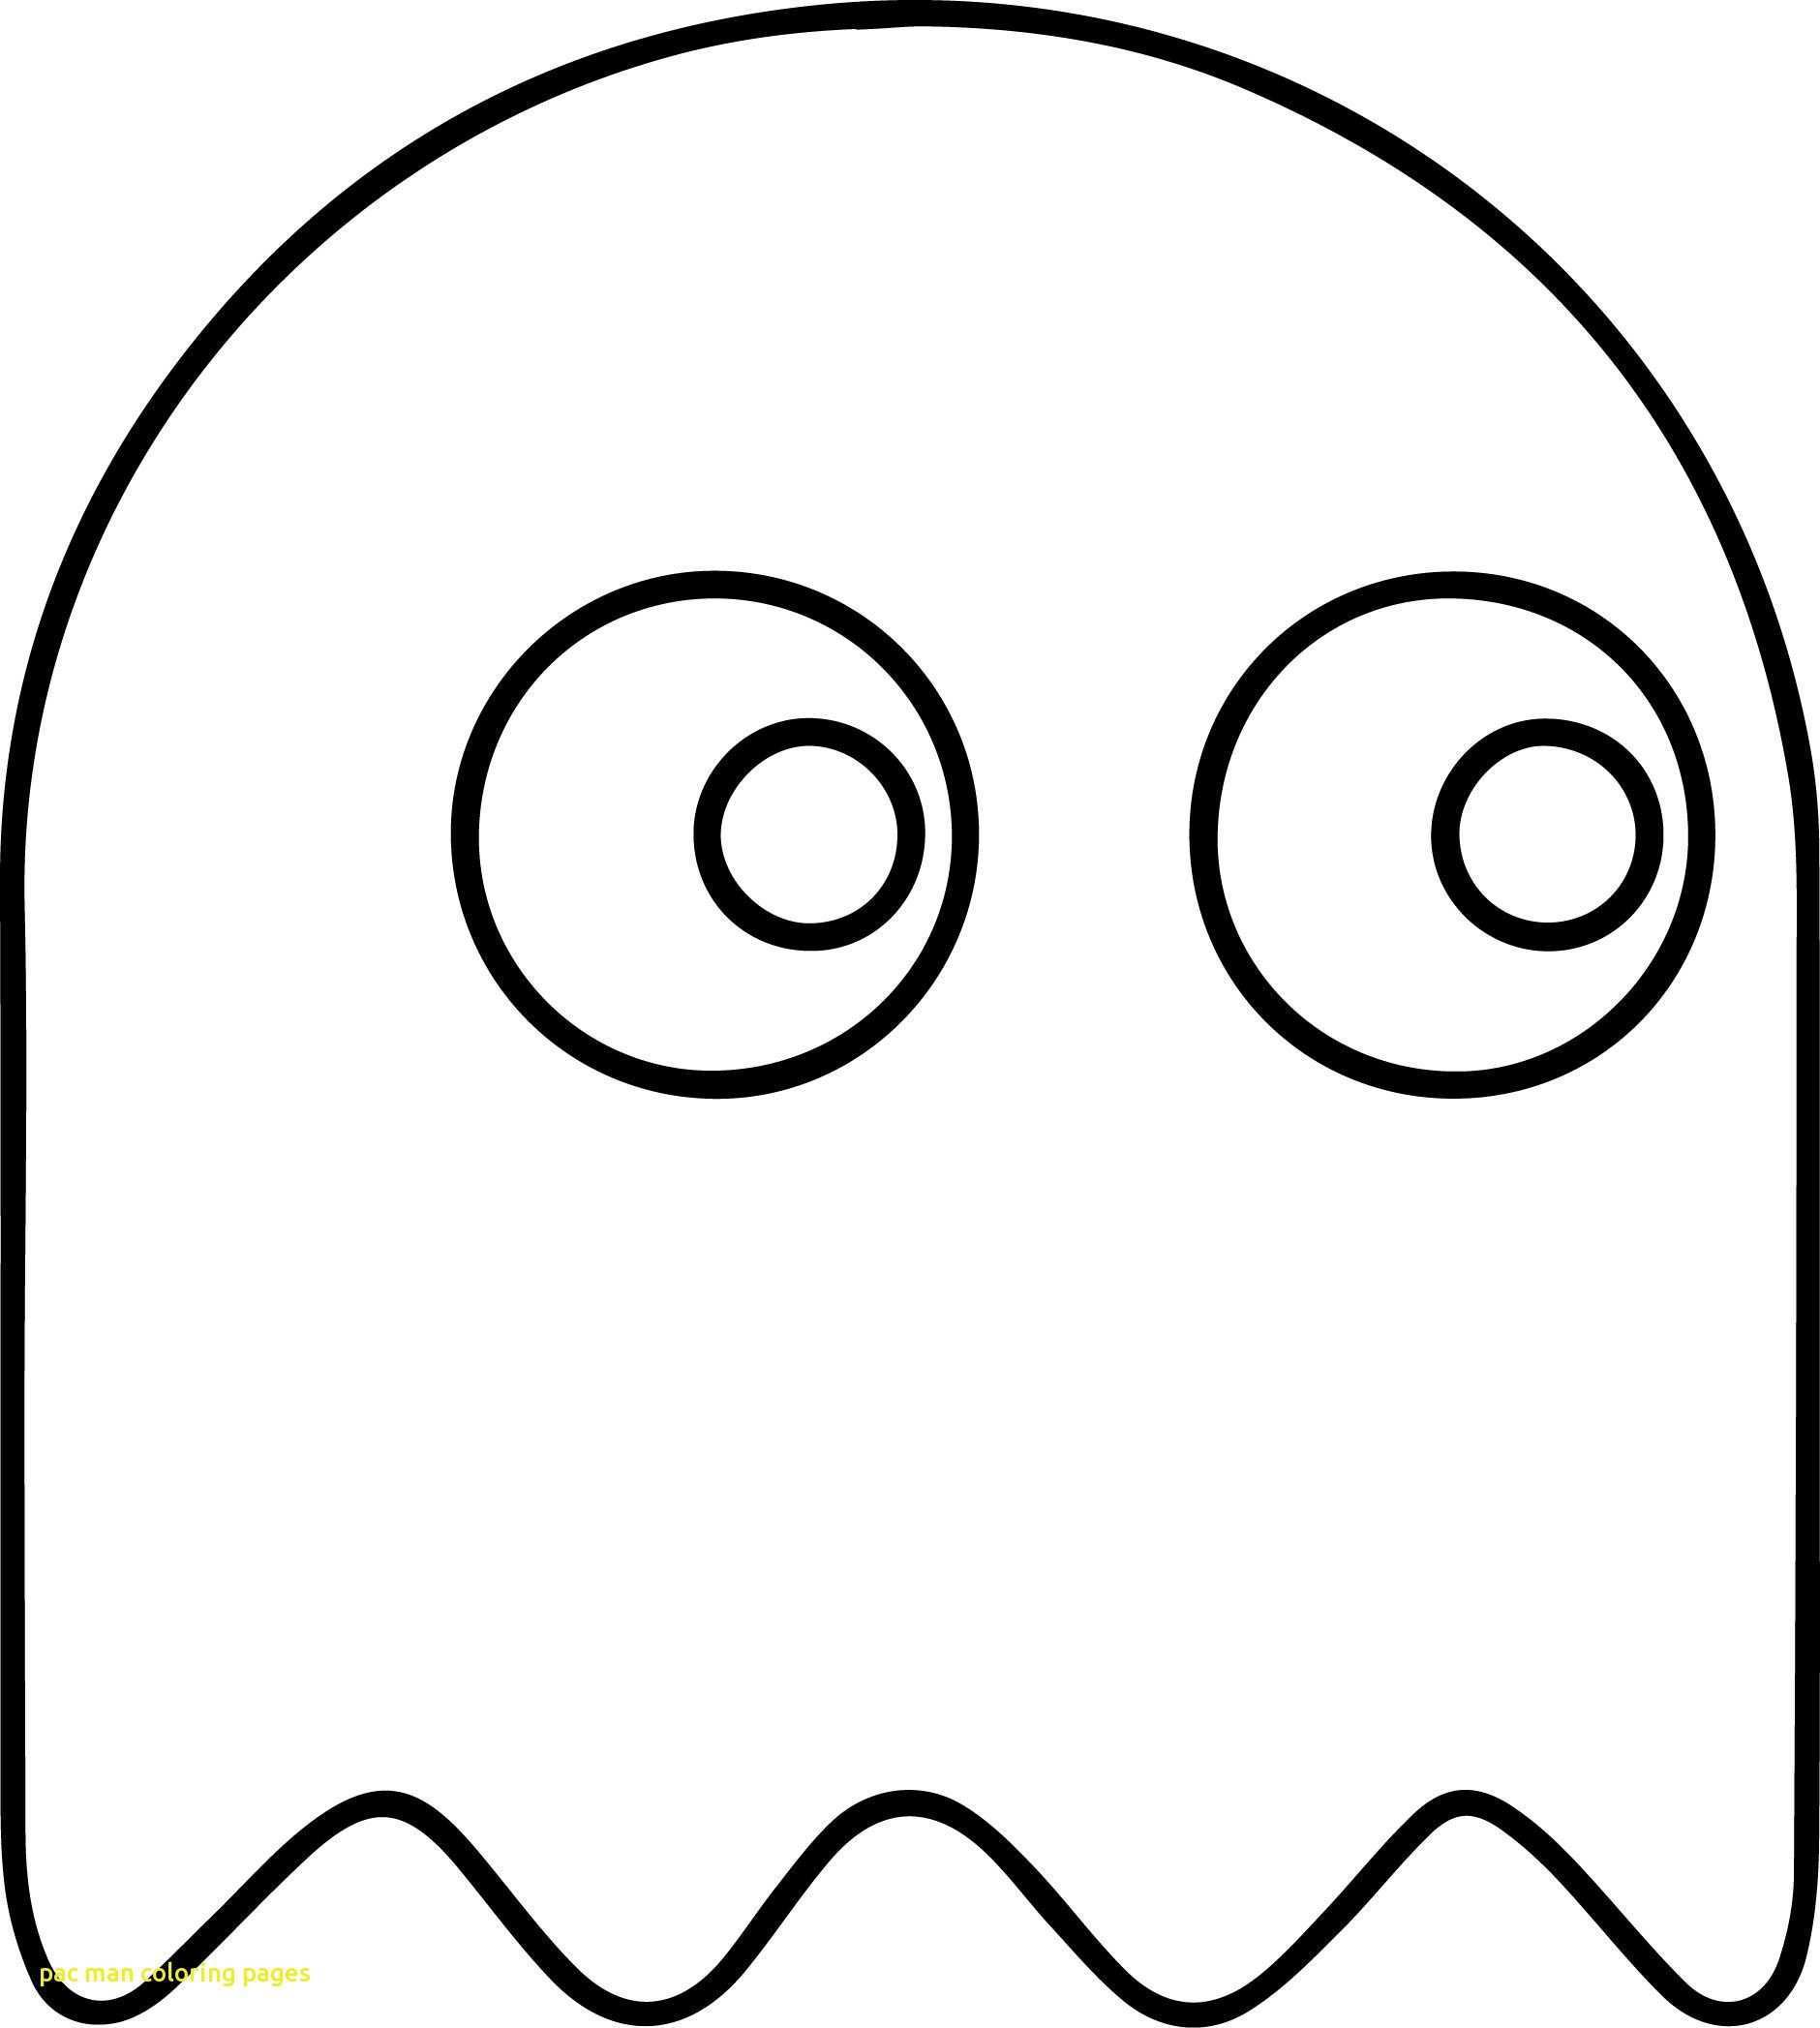 Pacman Game Coloring Pages 2018 Open Coloring Pages Pacman Ghost Fruit Coloring Pages